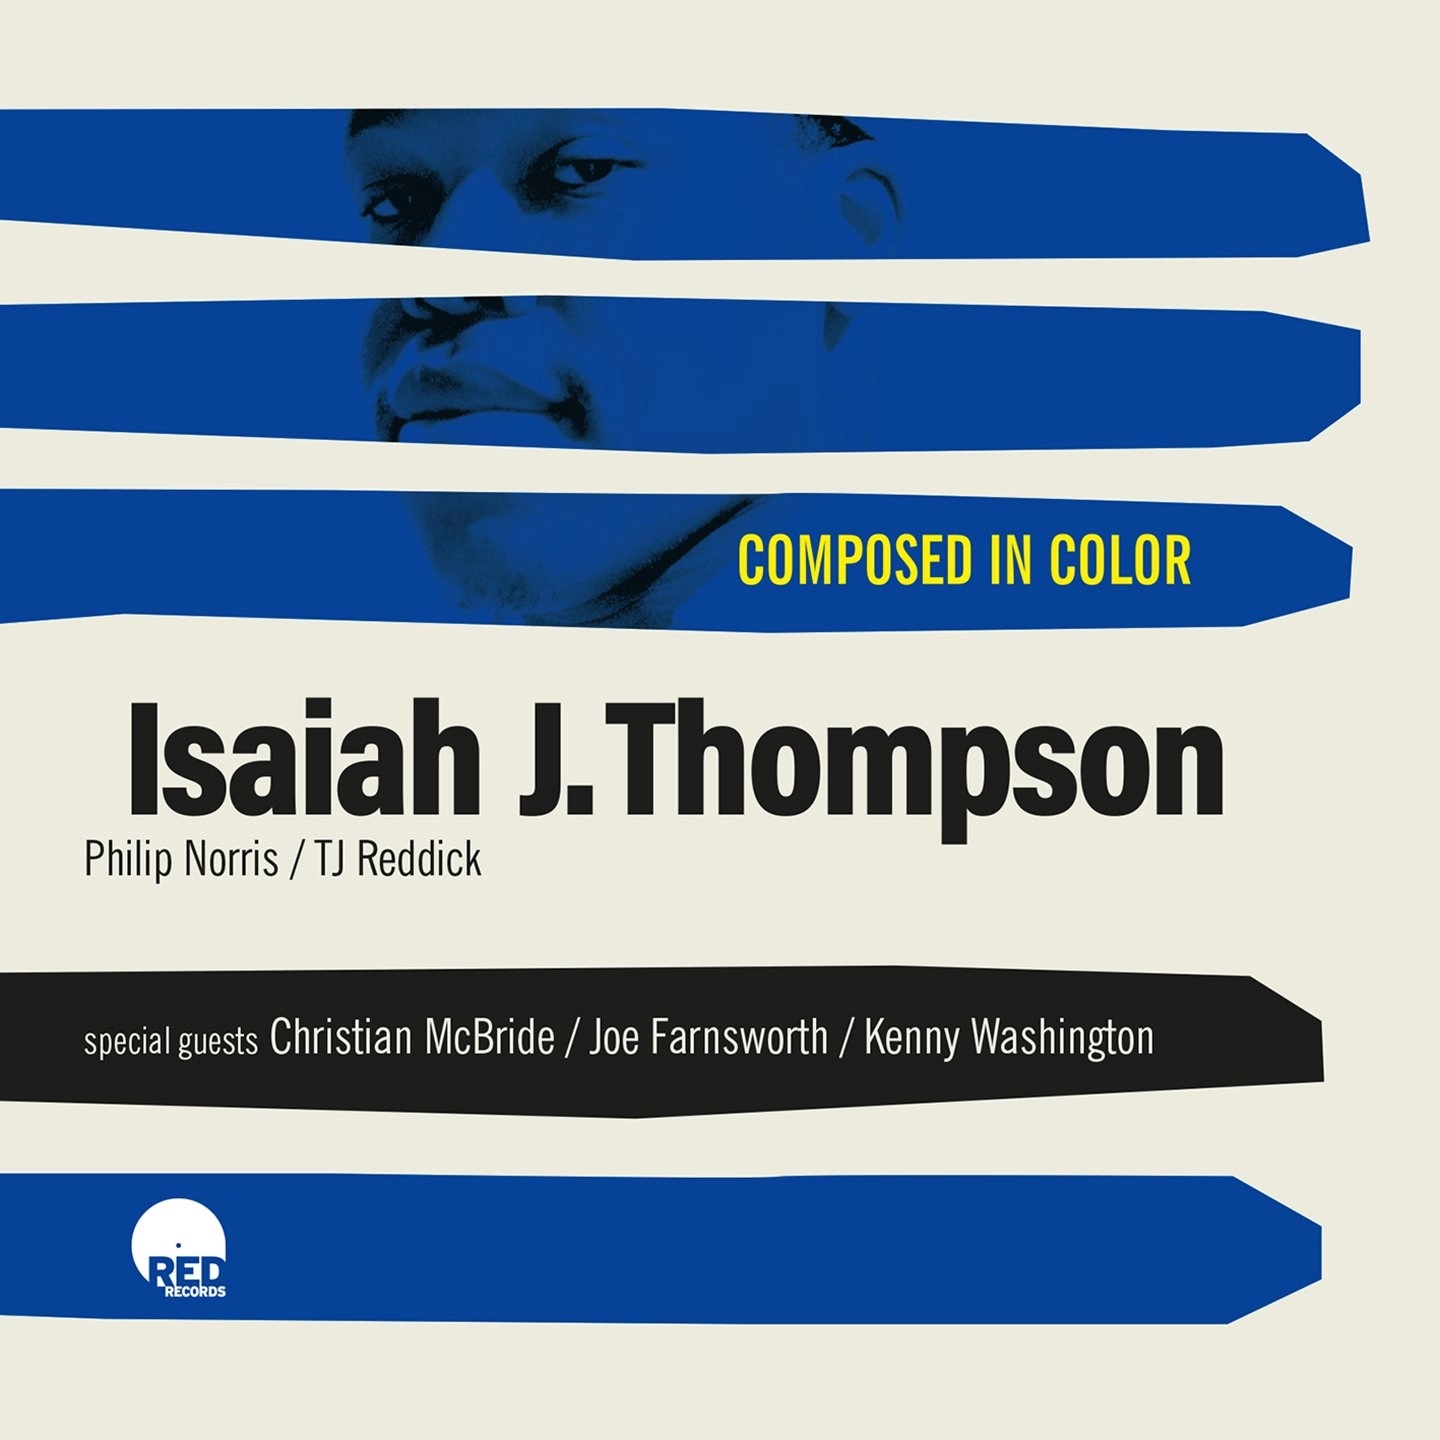 Isaiah J. Thompson / Composed in Color